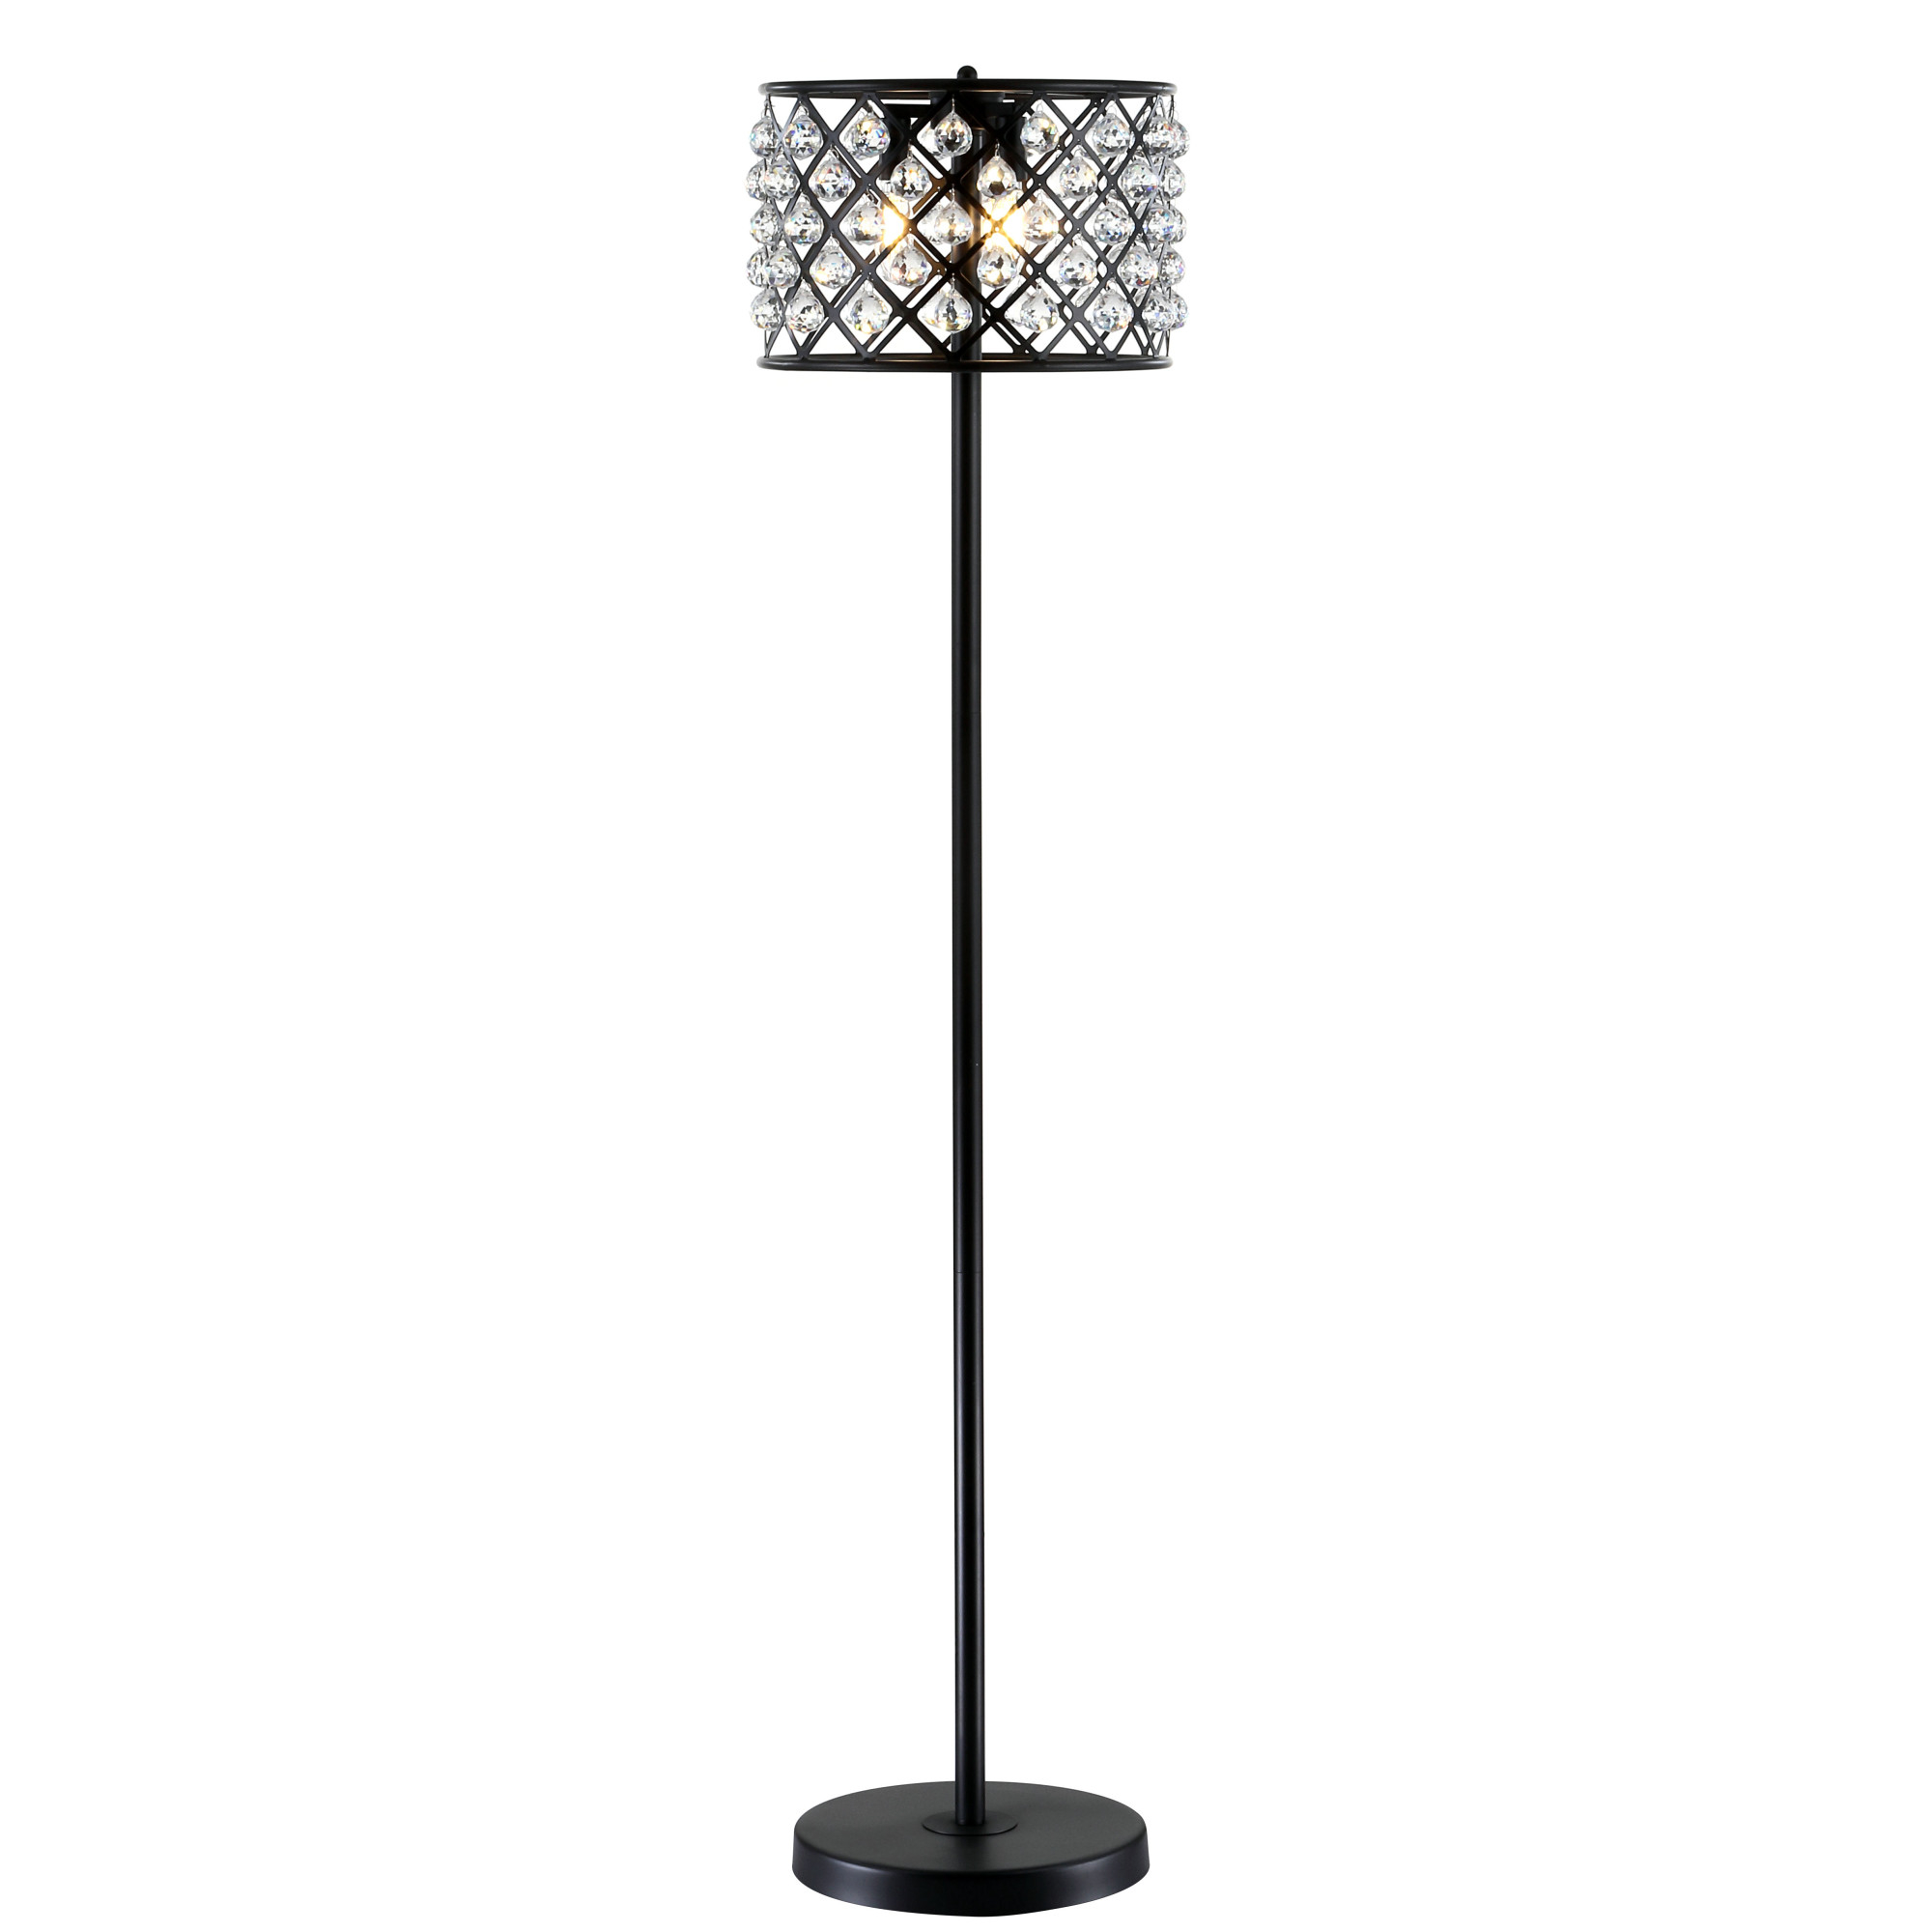 Details About Jonathan Y Lighting Jyl9000 Elizabeth 3 Light 60 Tall Led Buffet Floor Lamp with regard to proportions 2000 X 2000